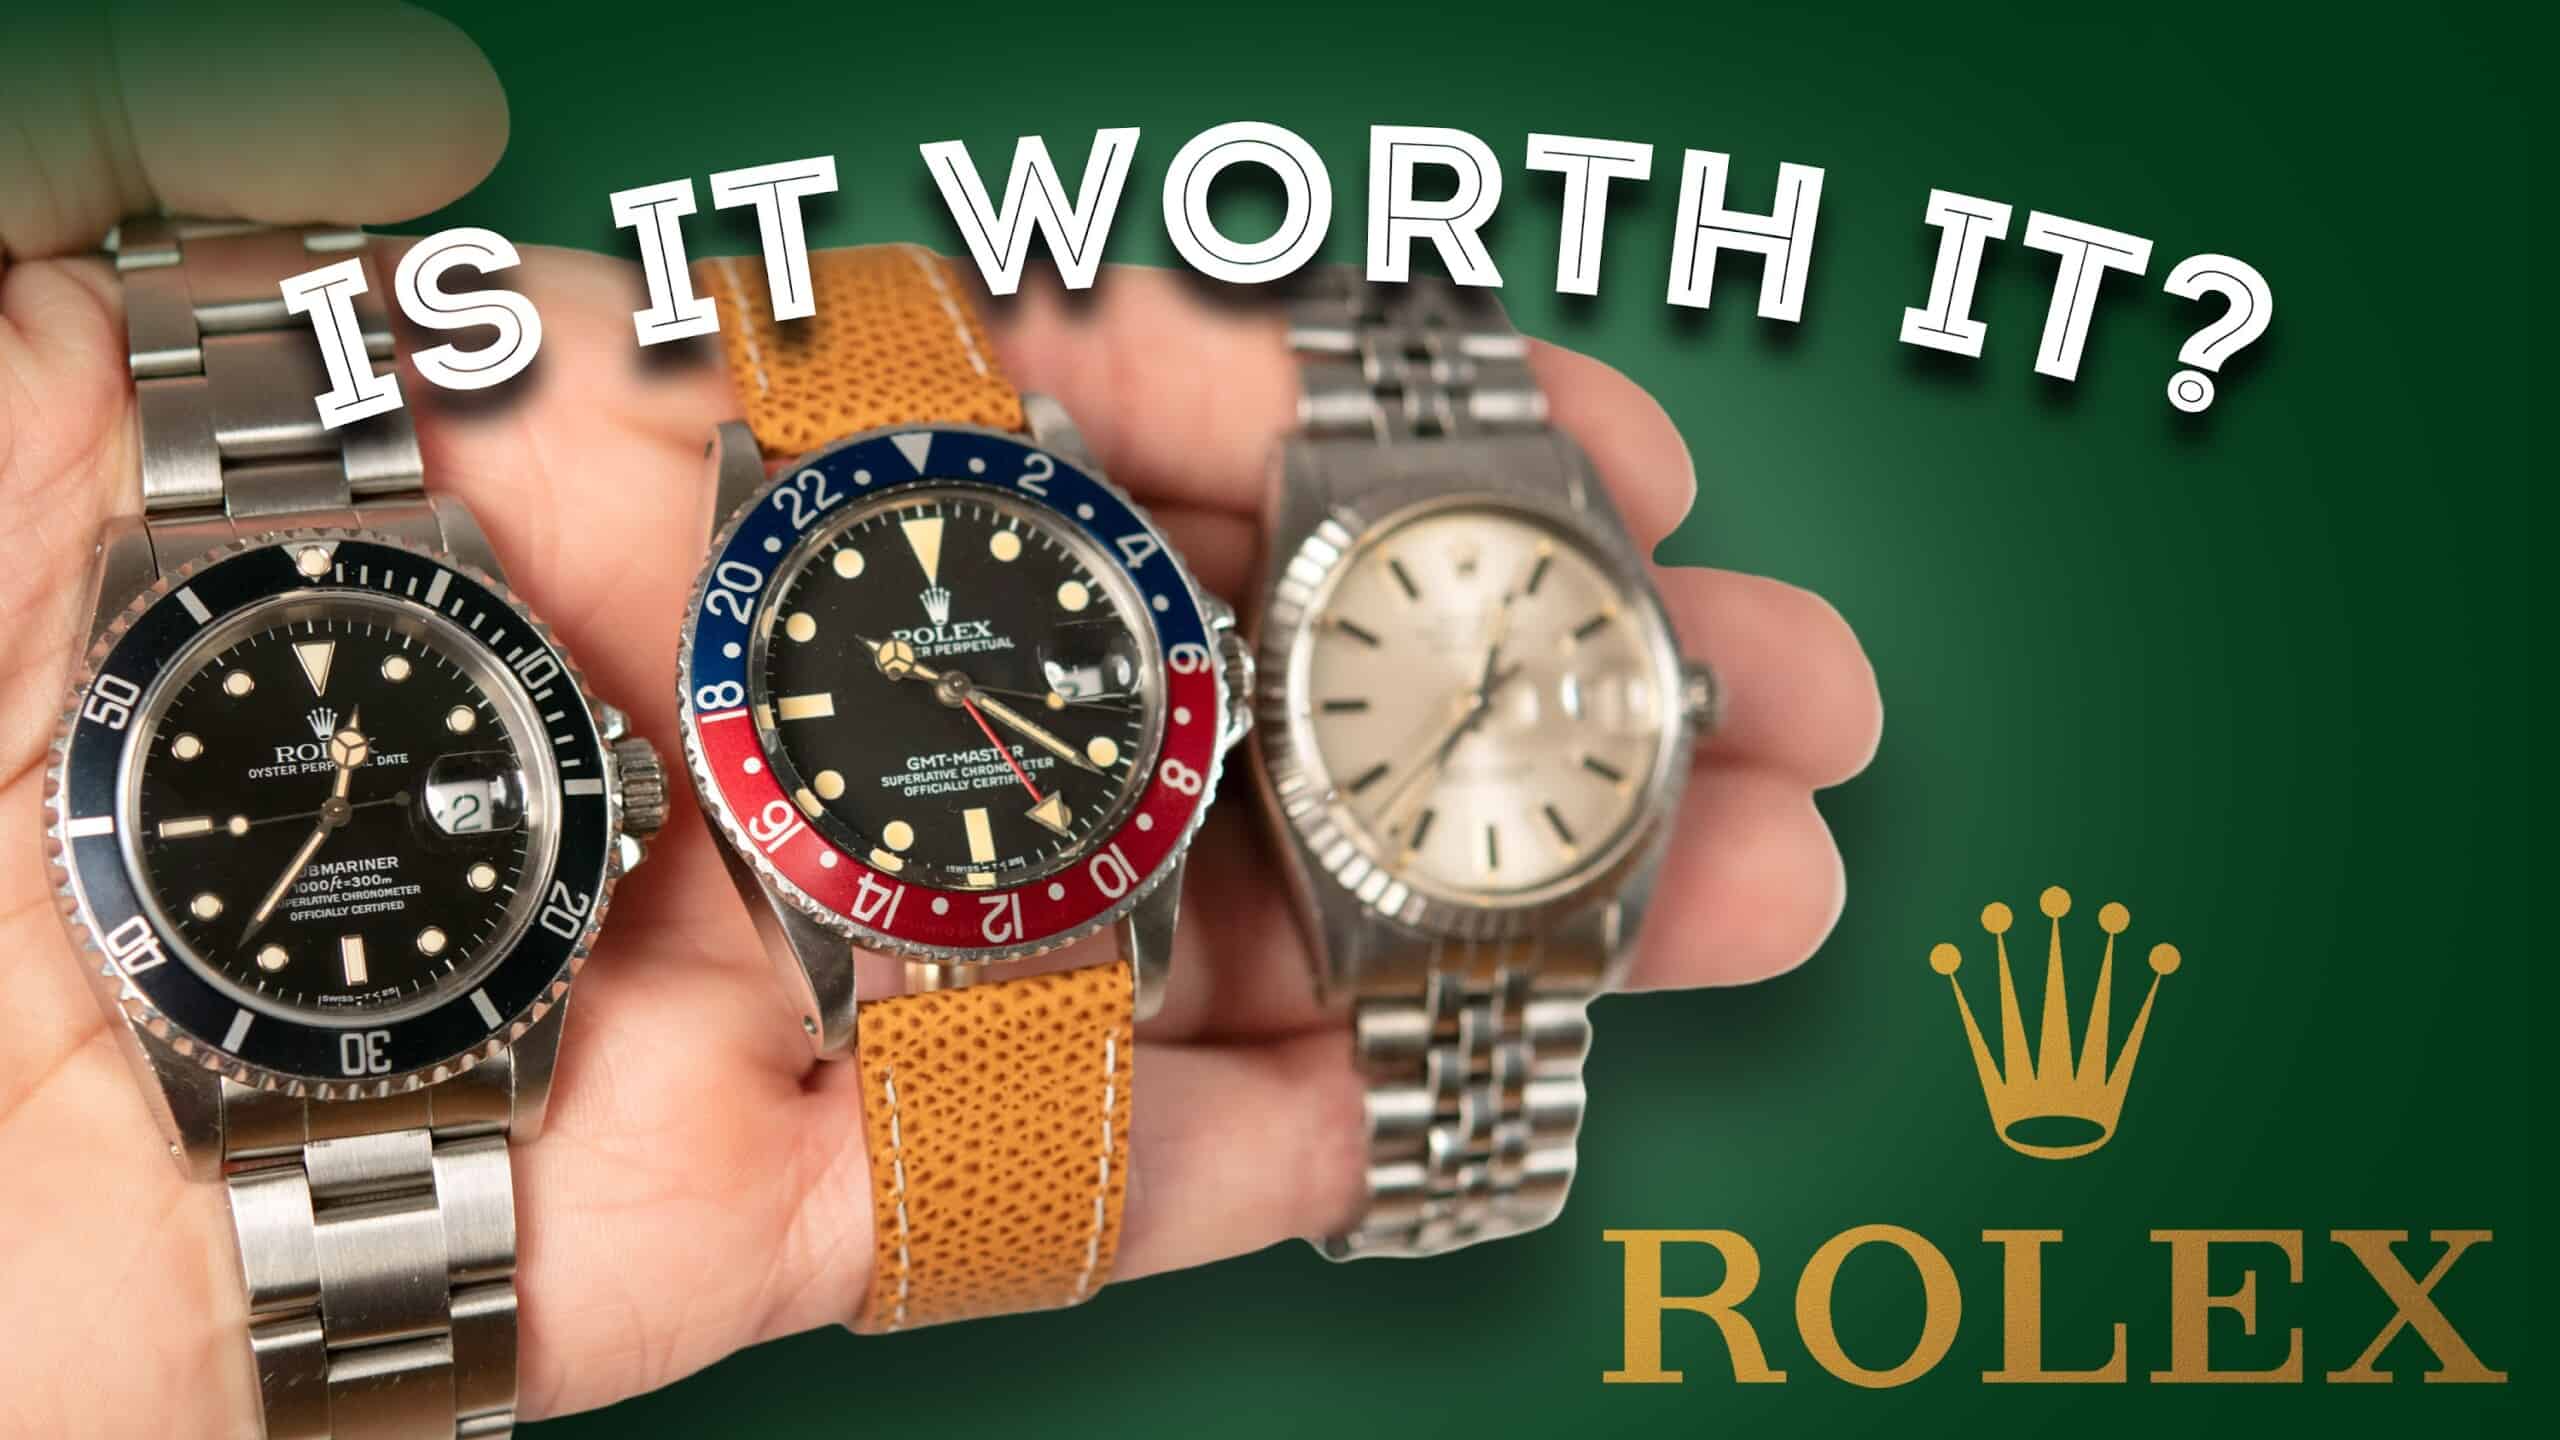 Rolex Watches: They Worth It? Men's Watch Review - Datejust, Submariner, GMT Master